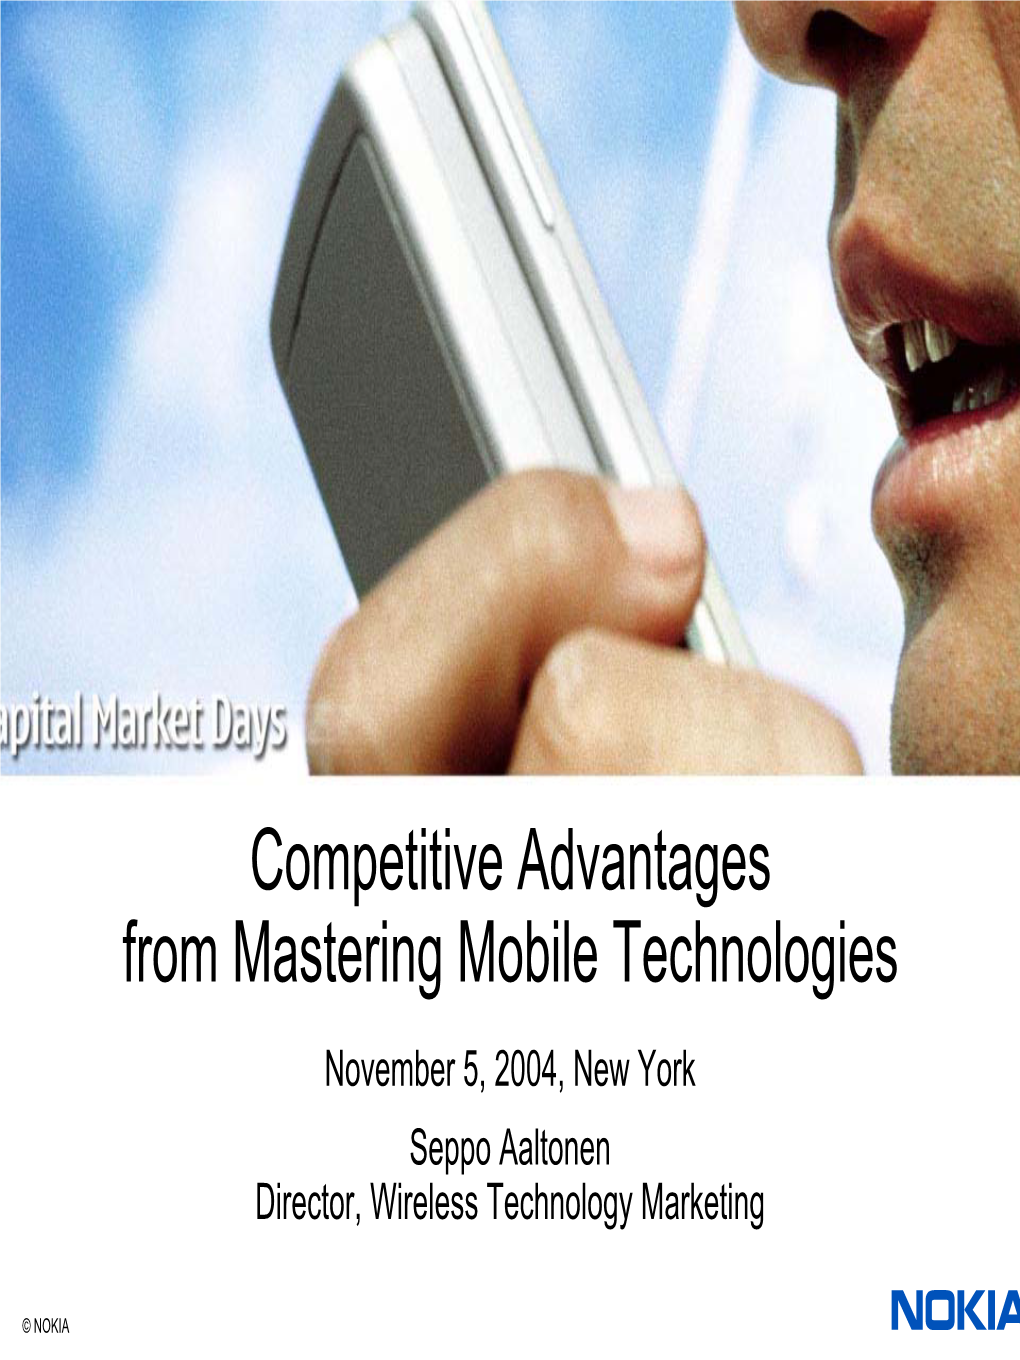 Competitive Advantages from Mastering Mobile Technologies November 5, 2004, New York Seppo Aaltonen Director, Wireless Technology Marketing